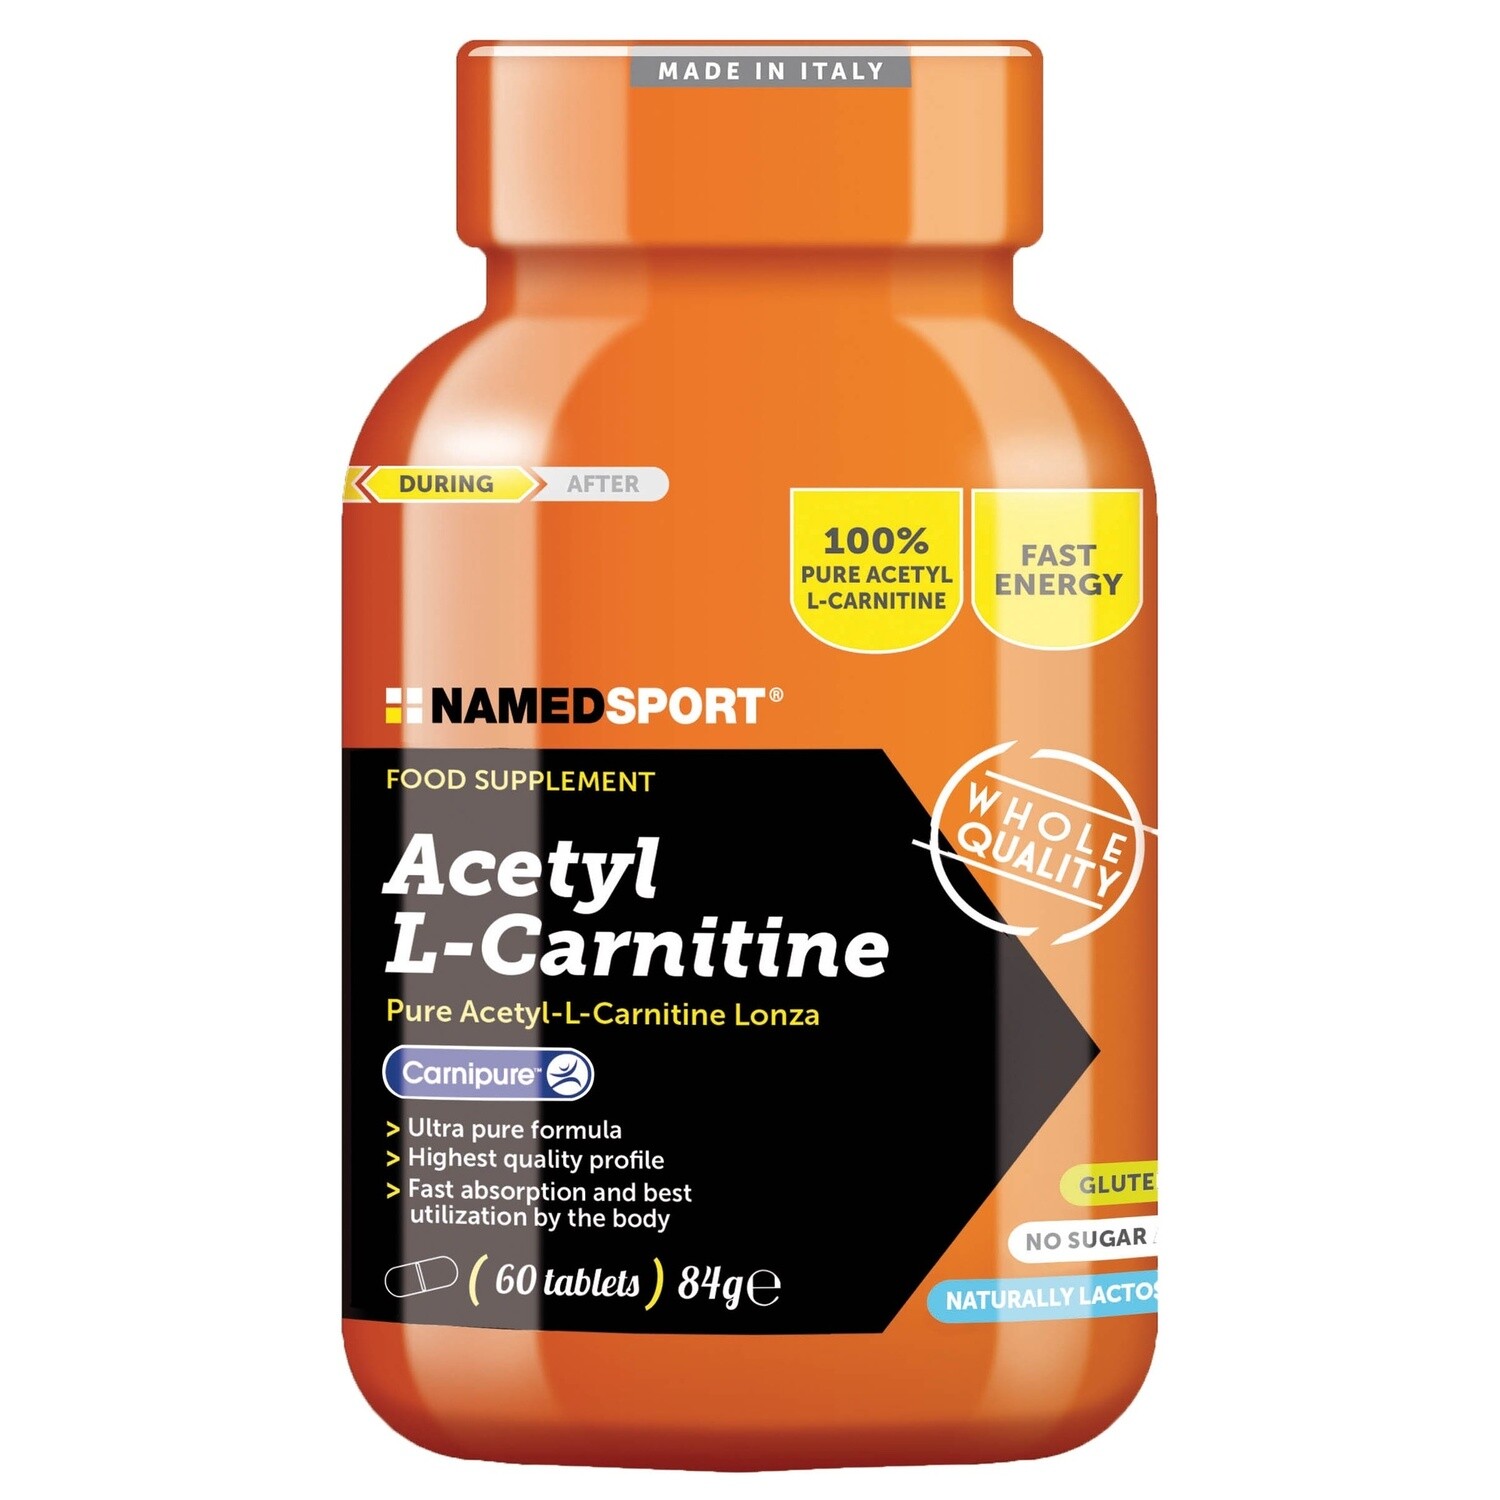 Acetyl L-Carnitine (60 tablets)